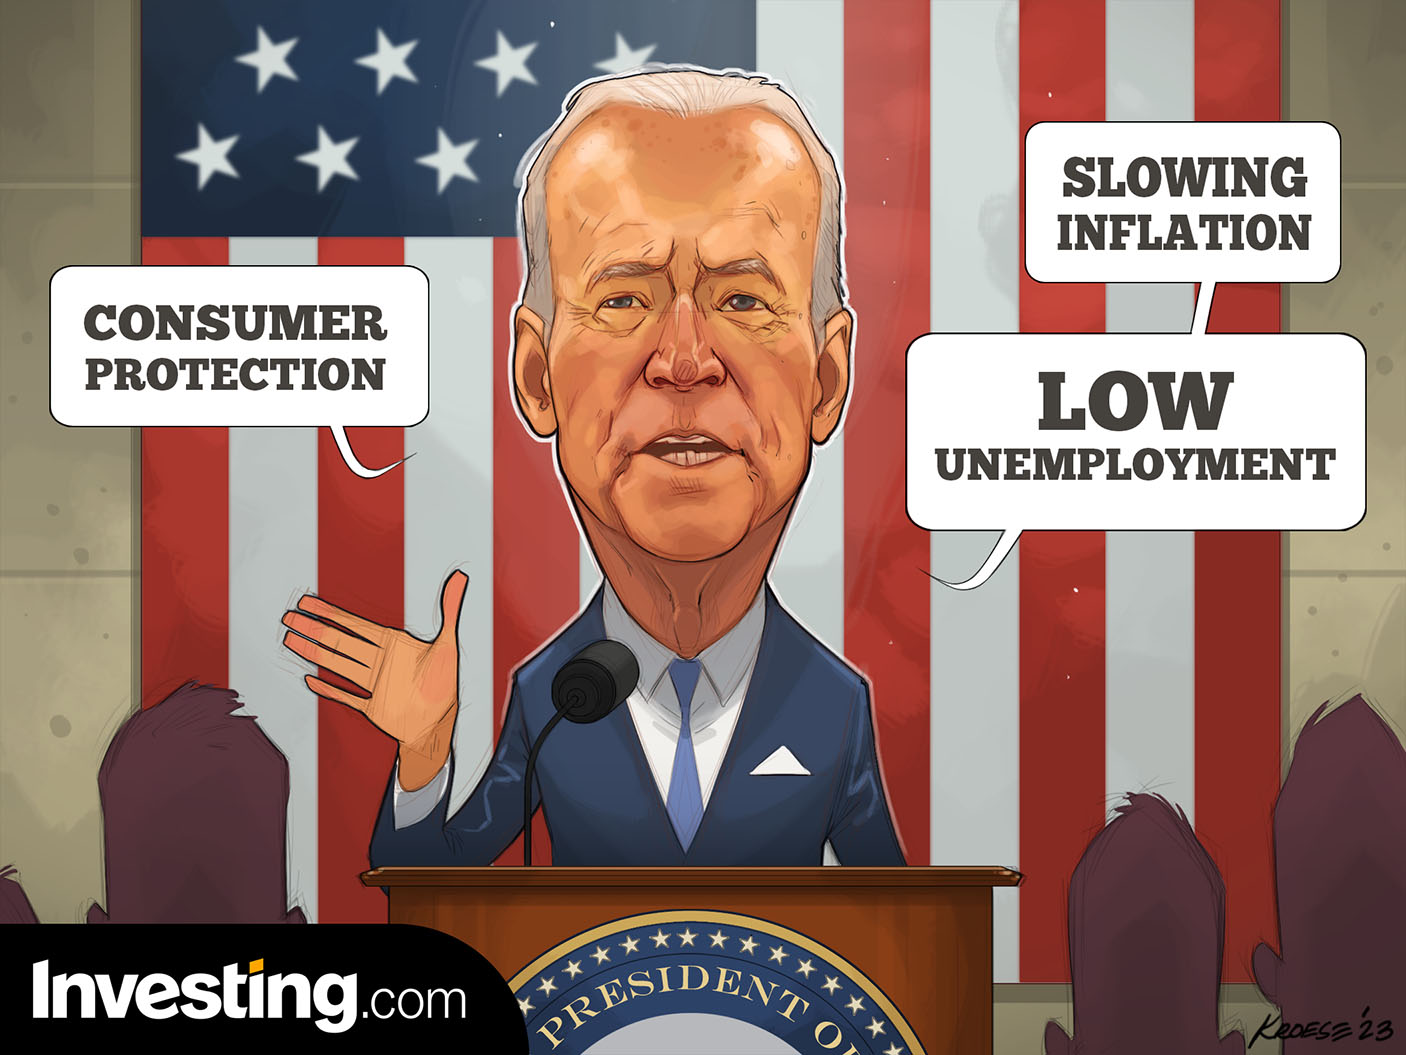 Biden Talks Work, Consumers and Inflation in 2023 State of the Union address